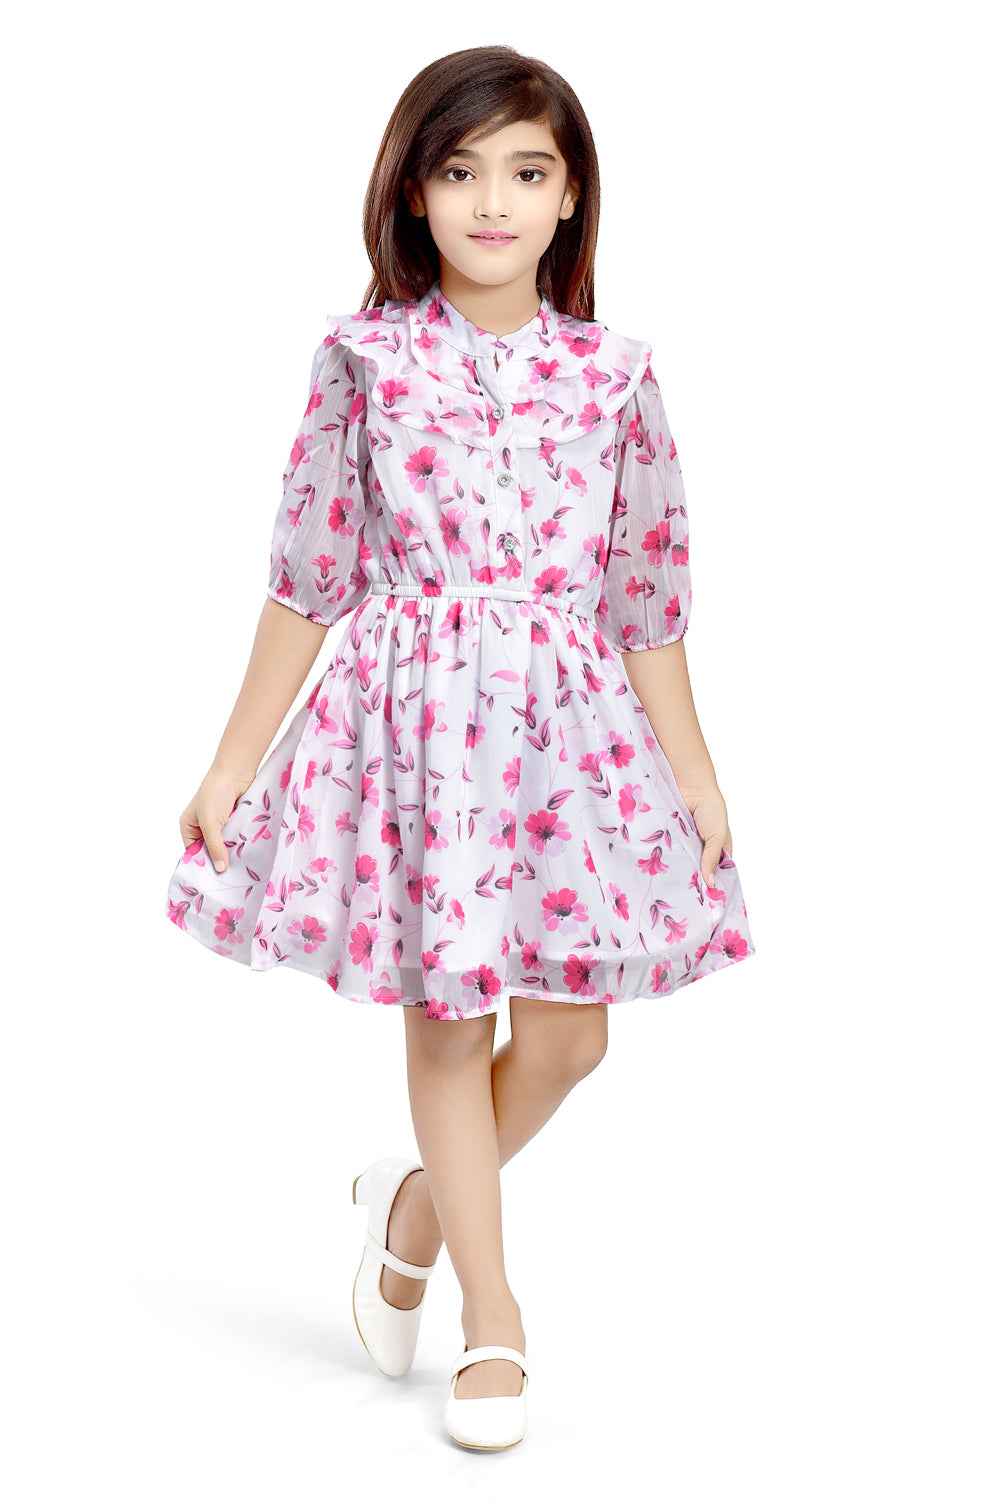 Doodle Girls White Chiffion Floral Ruffle Shirt Dress